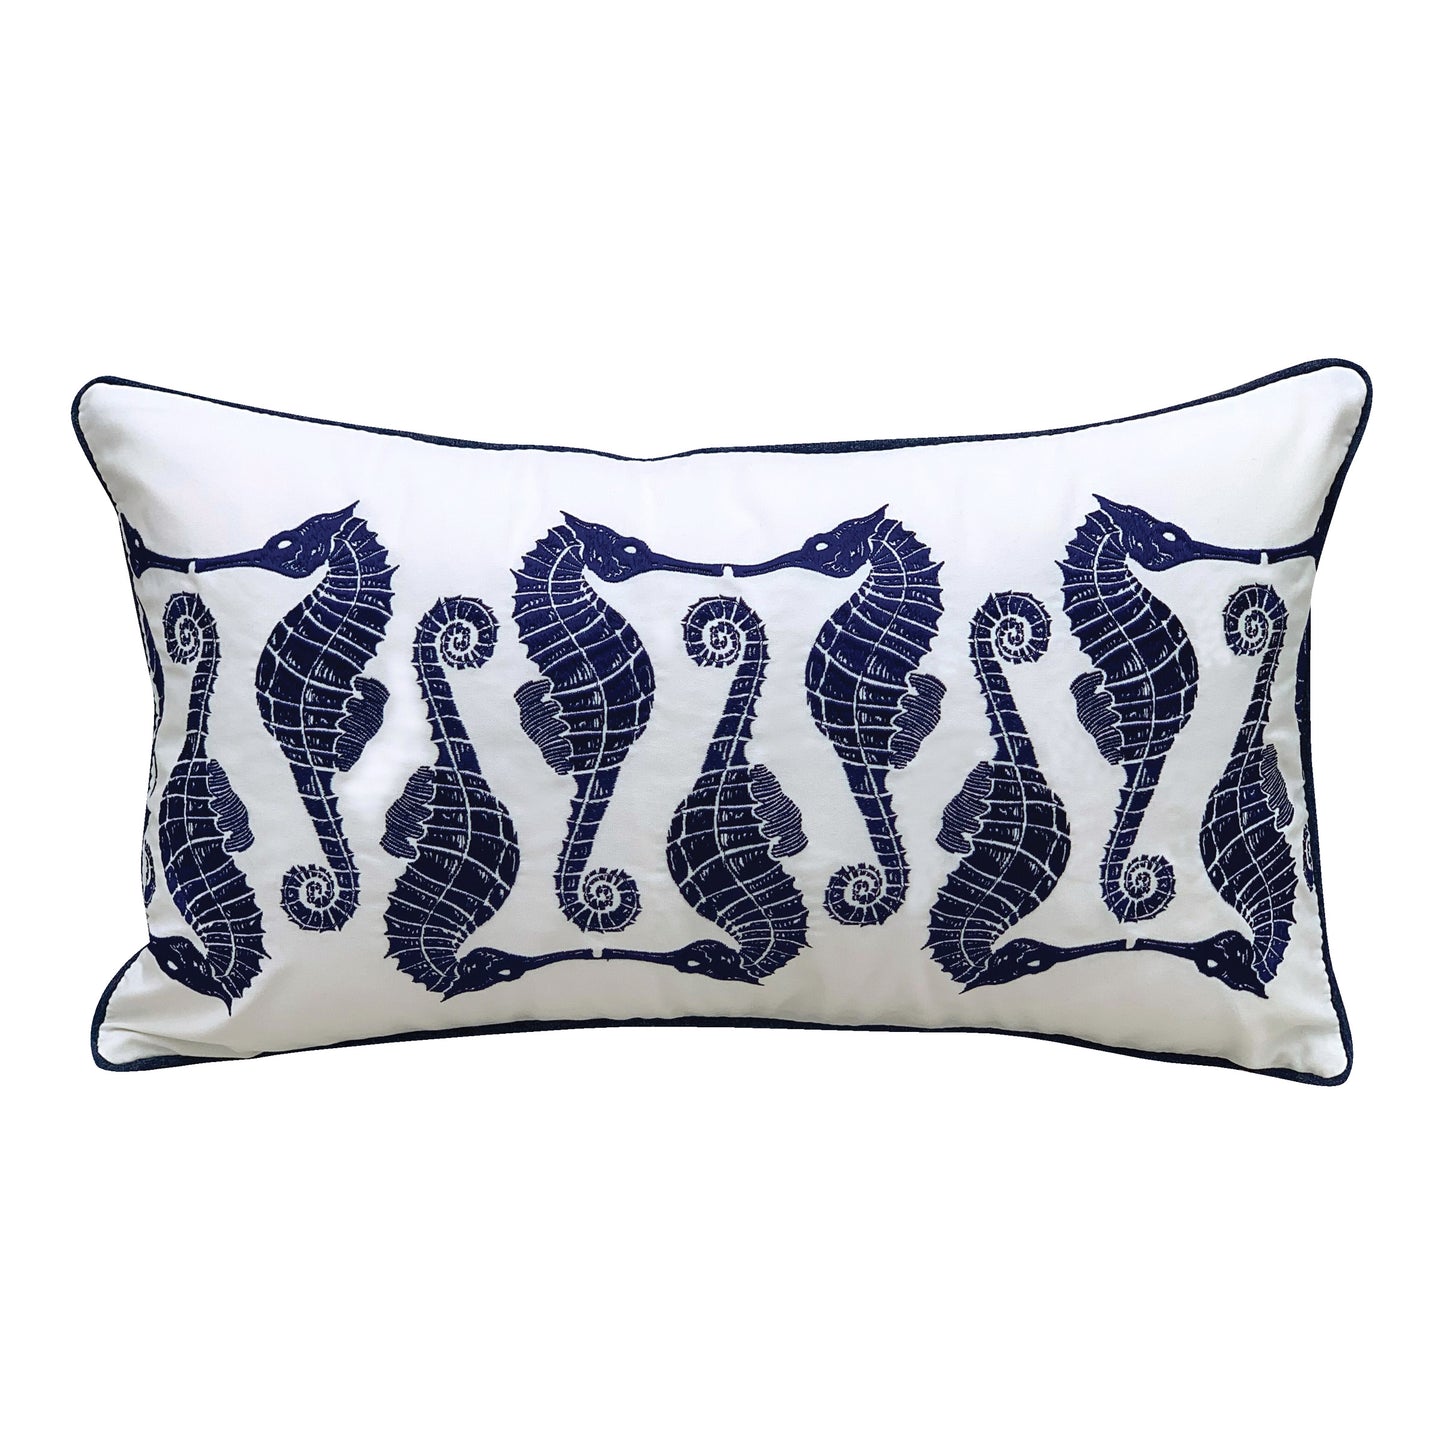 Indigo seahorses in an alternating pattern embroidered on a white background. Pillow is finished with blue piped edges.